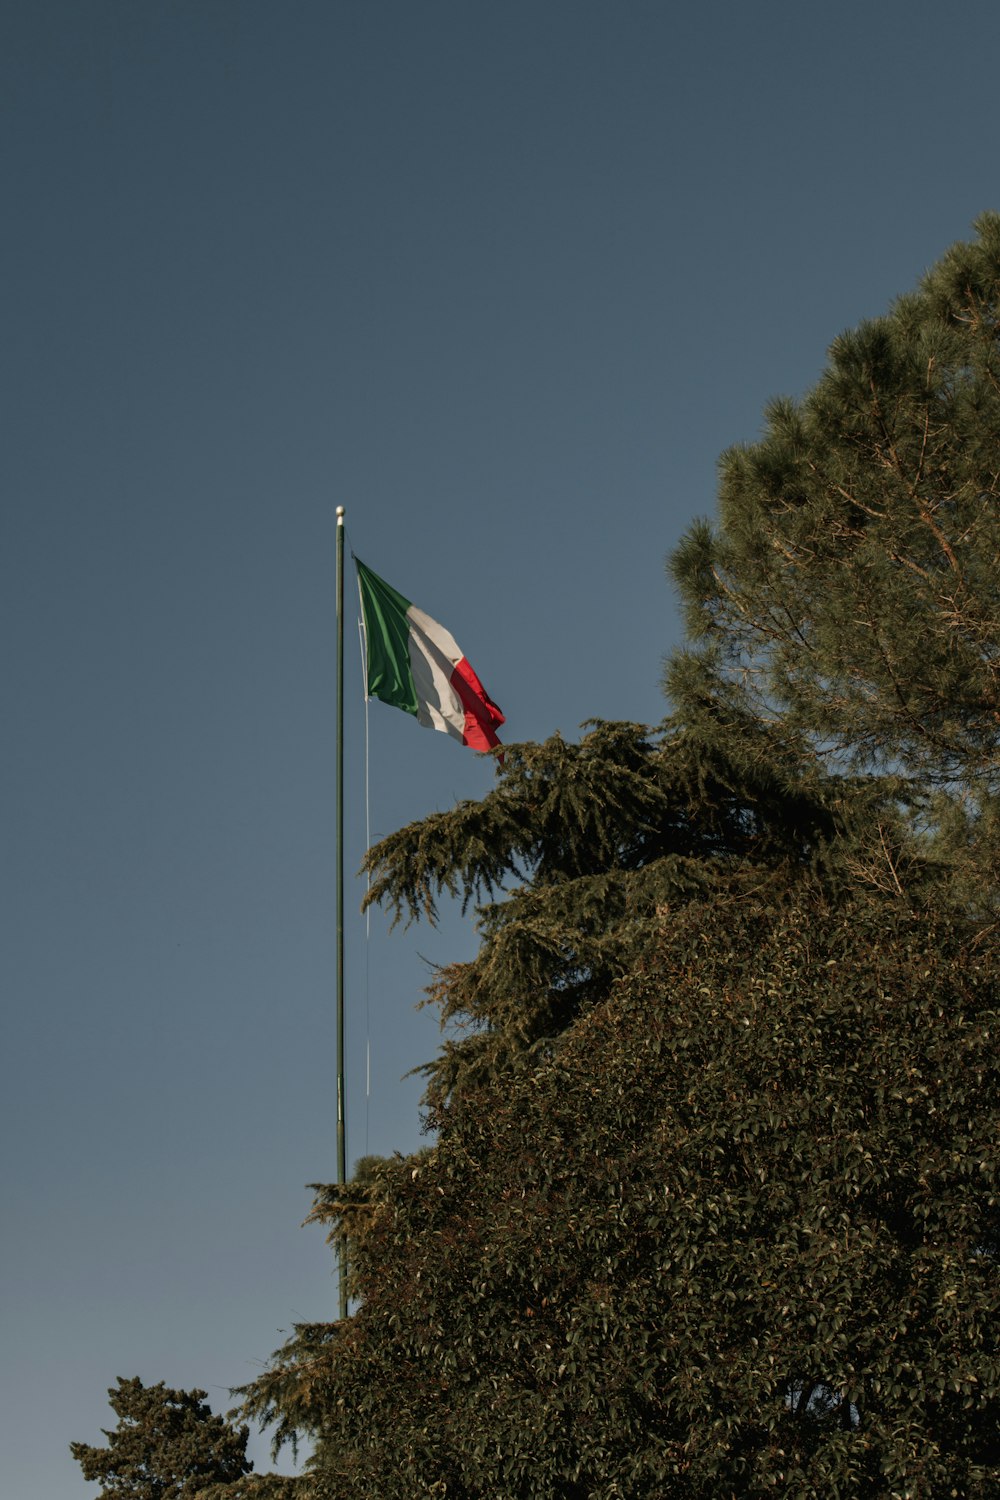 the flag of italy is flying high in the sky